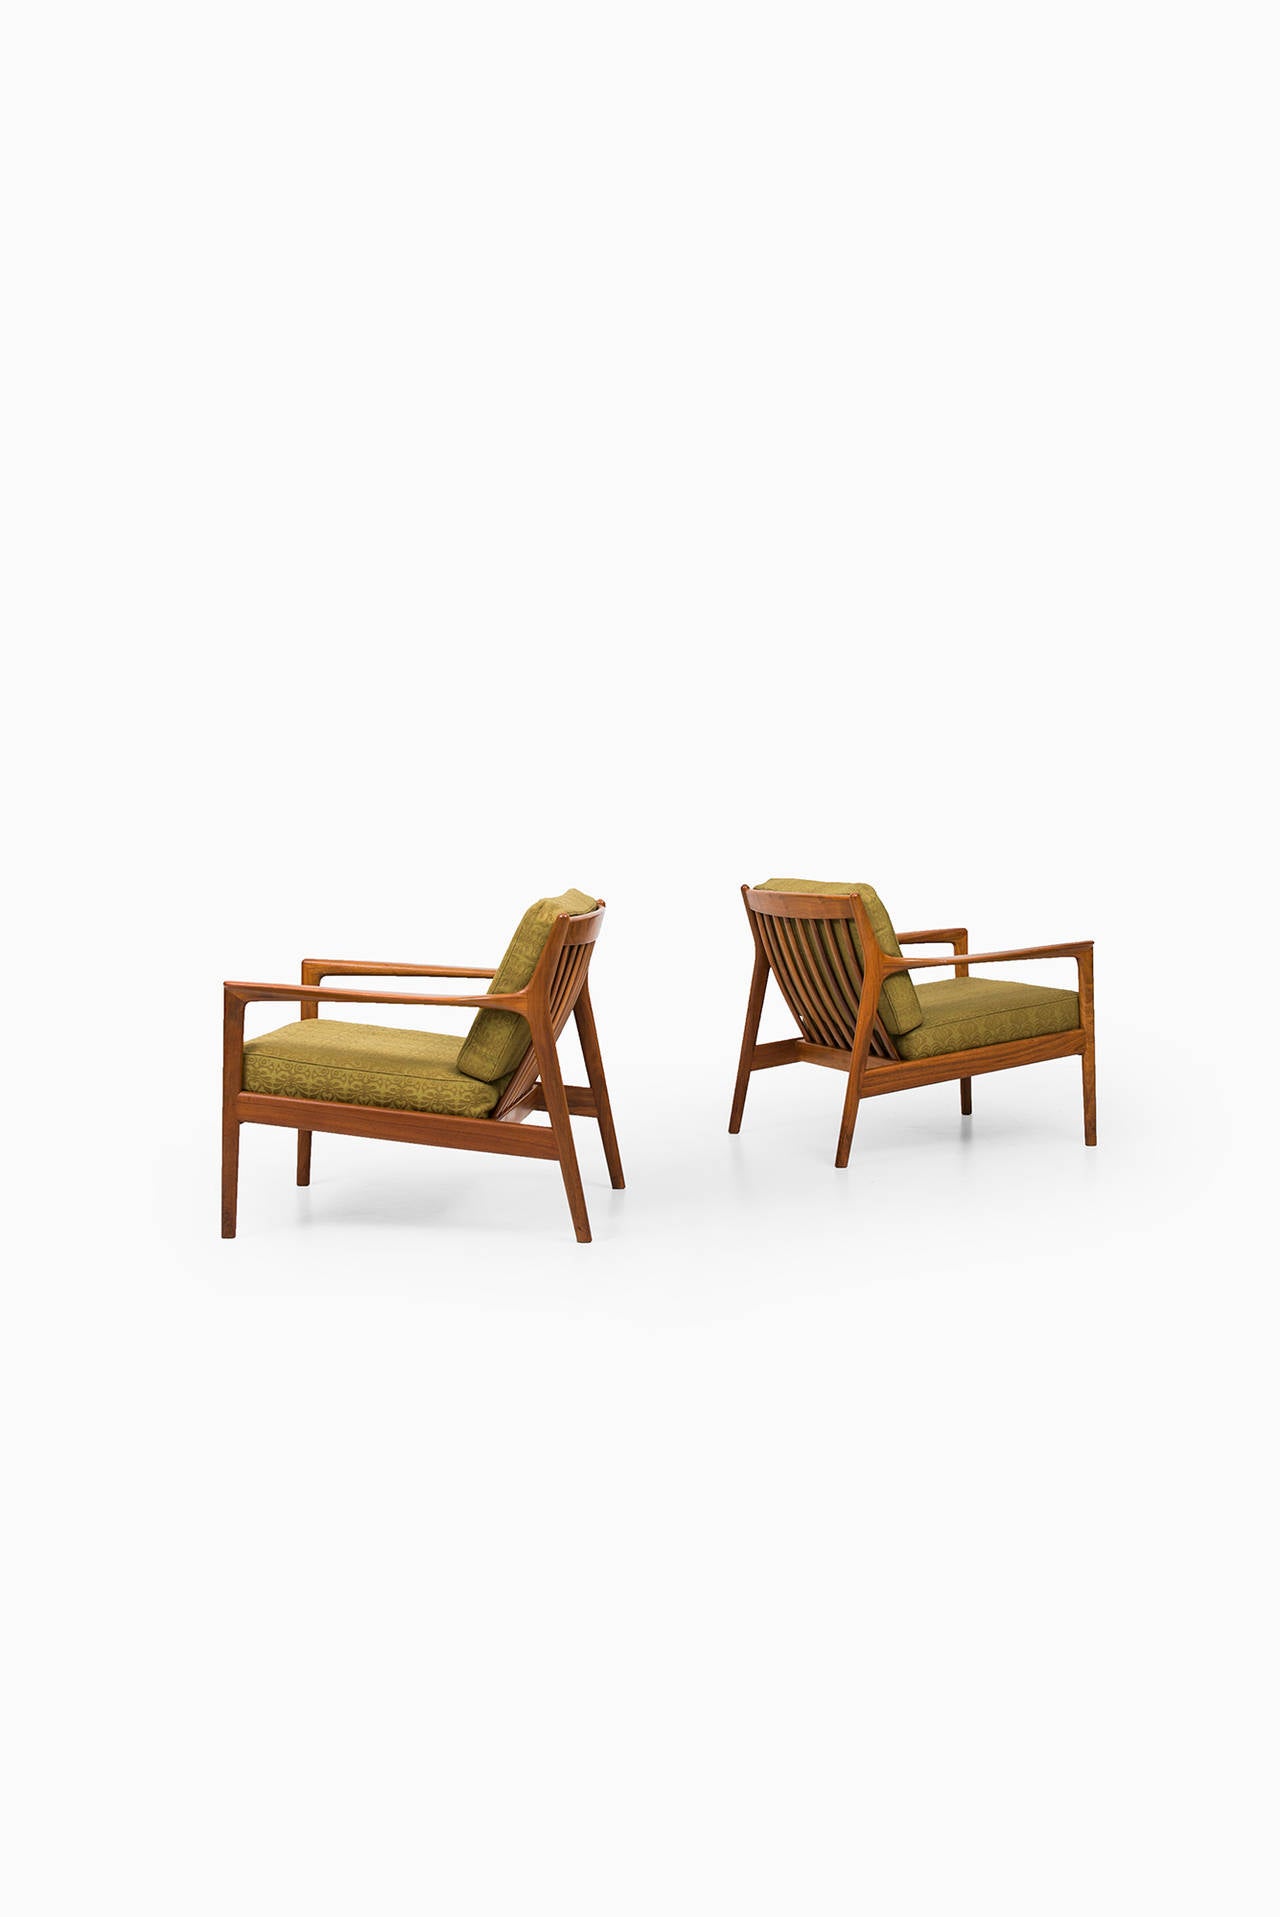 A pair of easy chairs model USA-75 designed by Folke Ohlsson. Produced by Dux in Sweden.